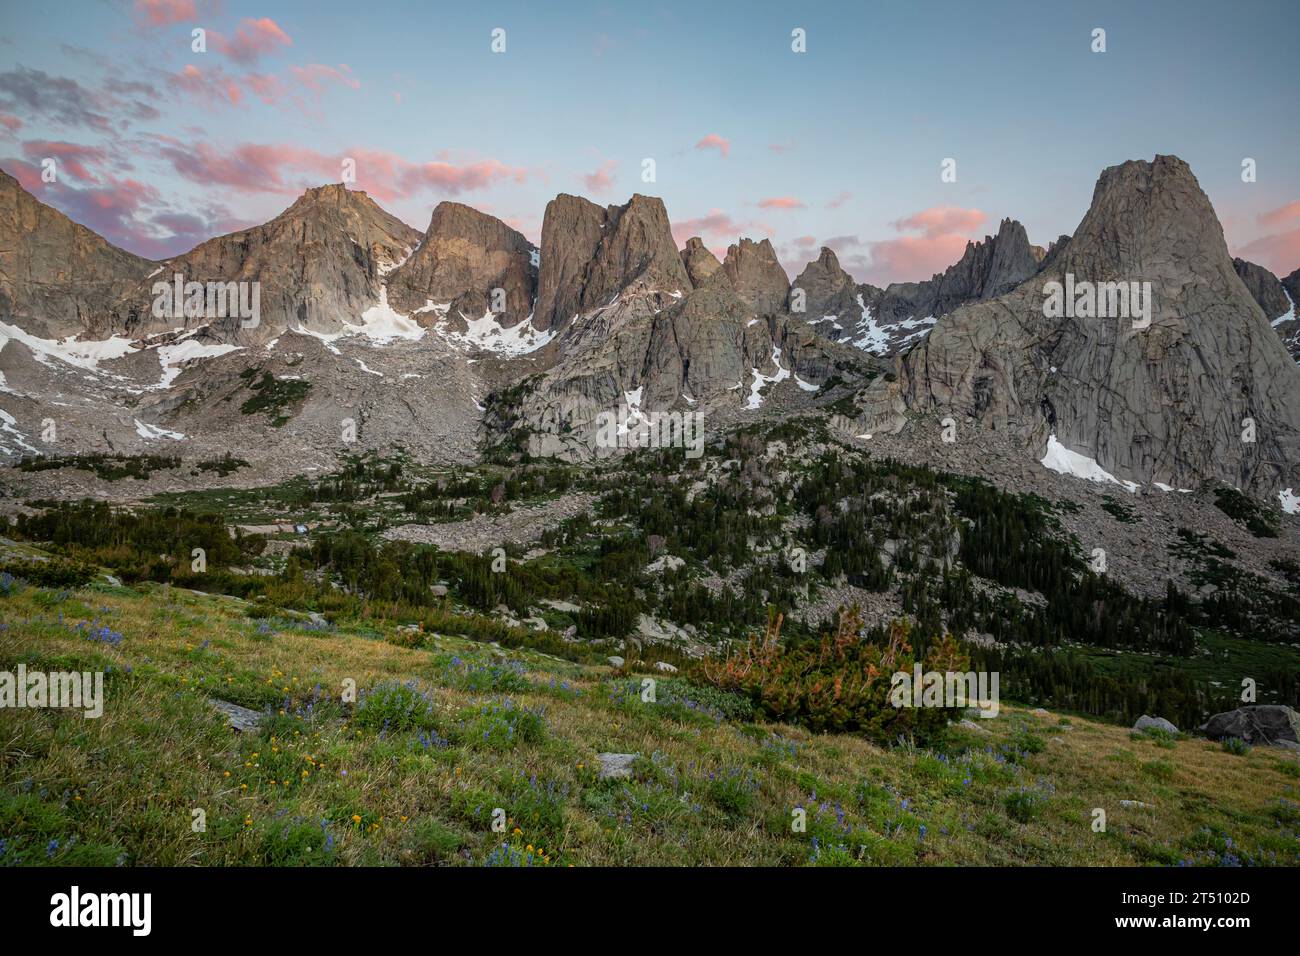 WY05580-00...WYOMING - North side of Jackass Pass at sunrise  in the Cirque of the Towers in the Popo Agie Wilderness area of the Wind River Range. Stock Photo